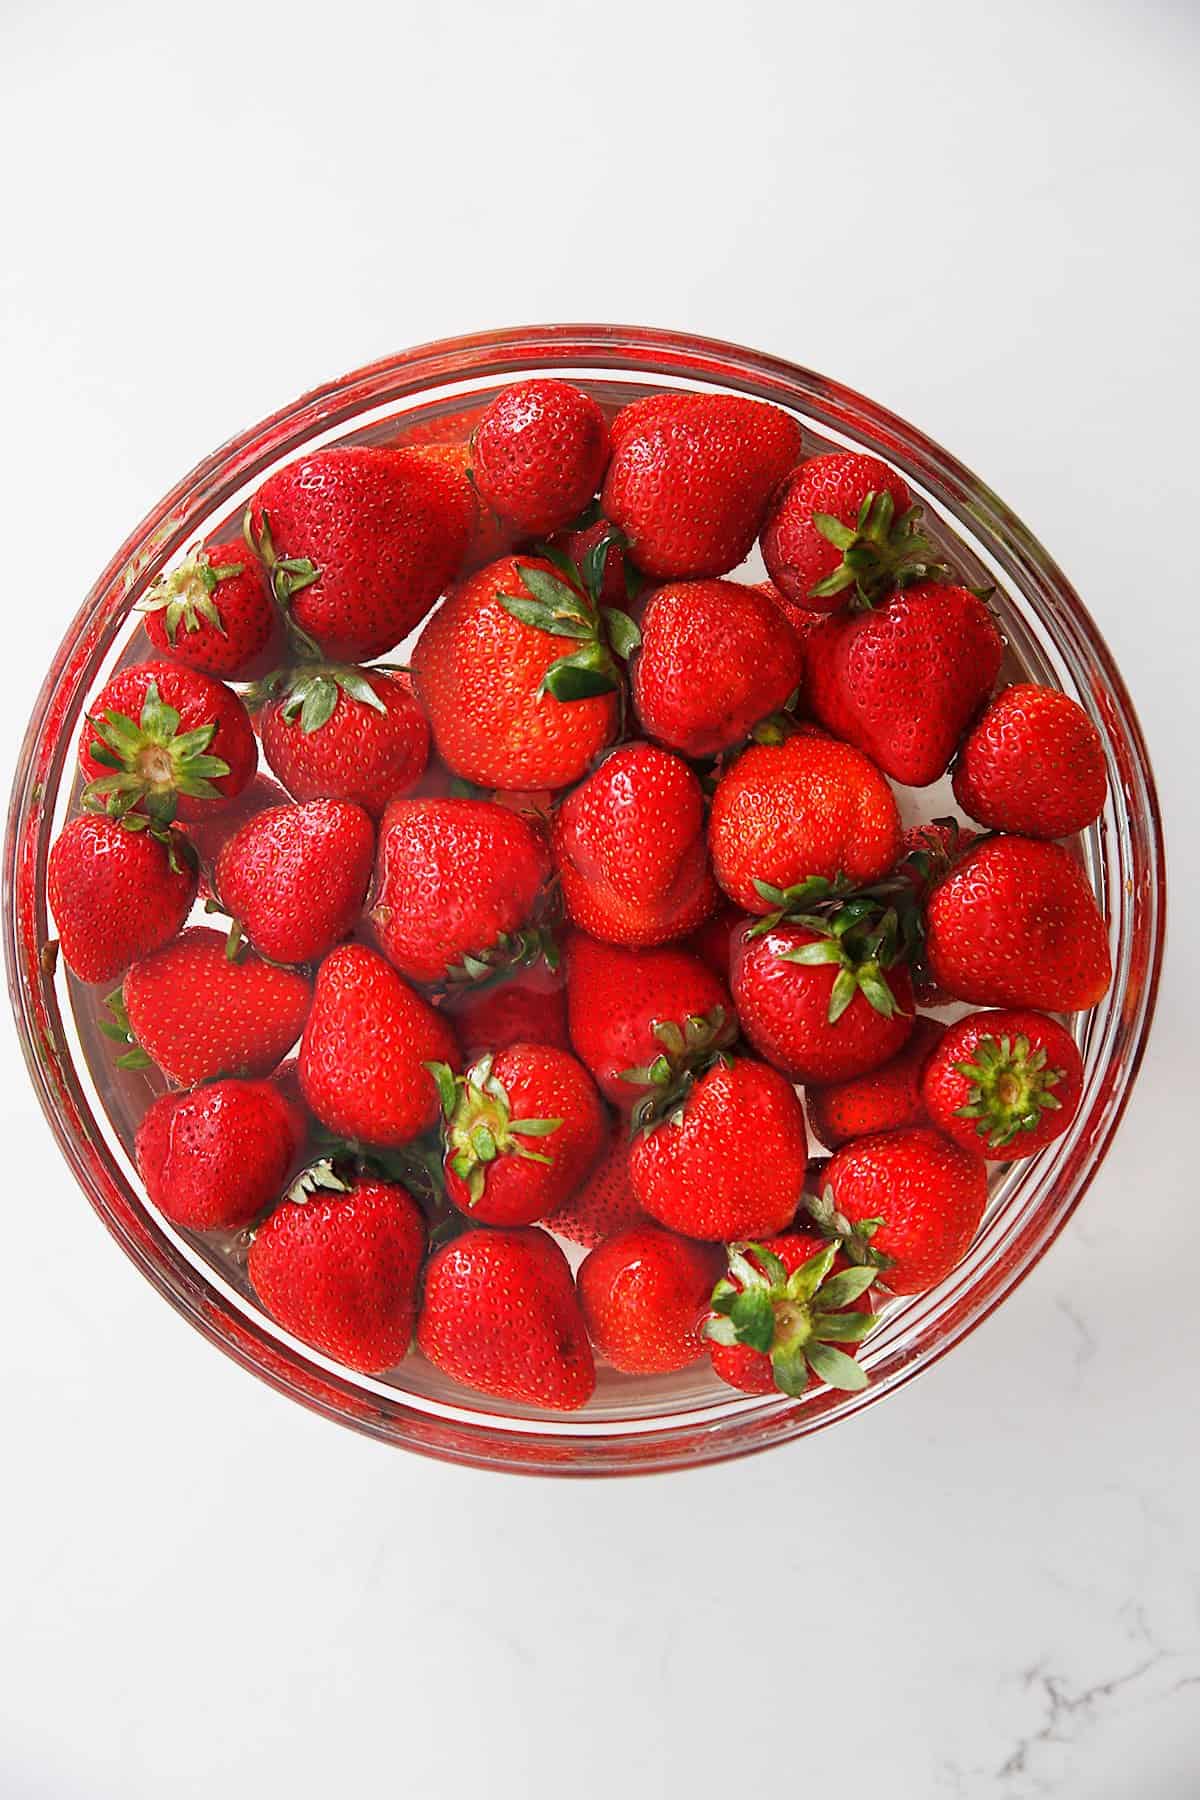 Cleaning strawberries properly